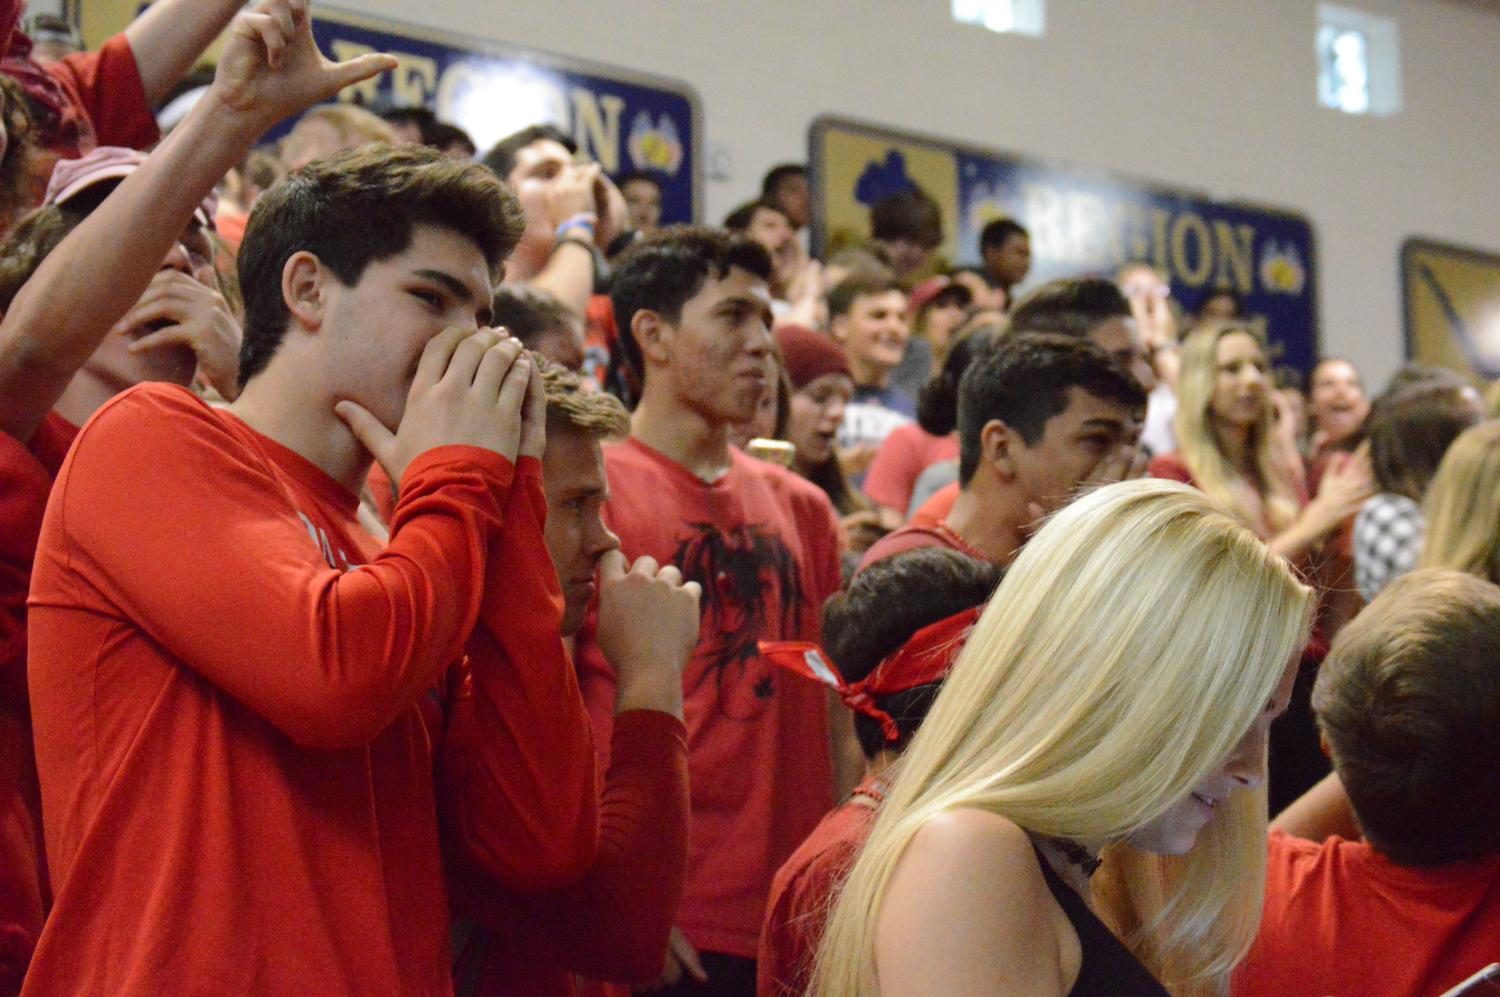 The juniors cheer at the assembly.